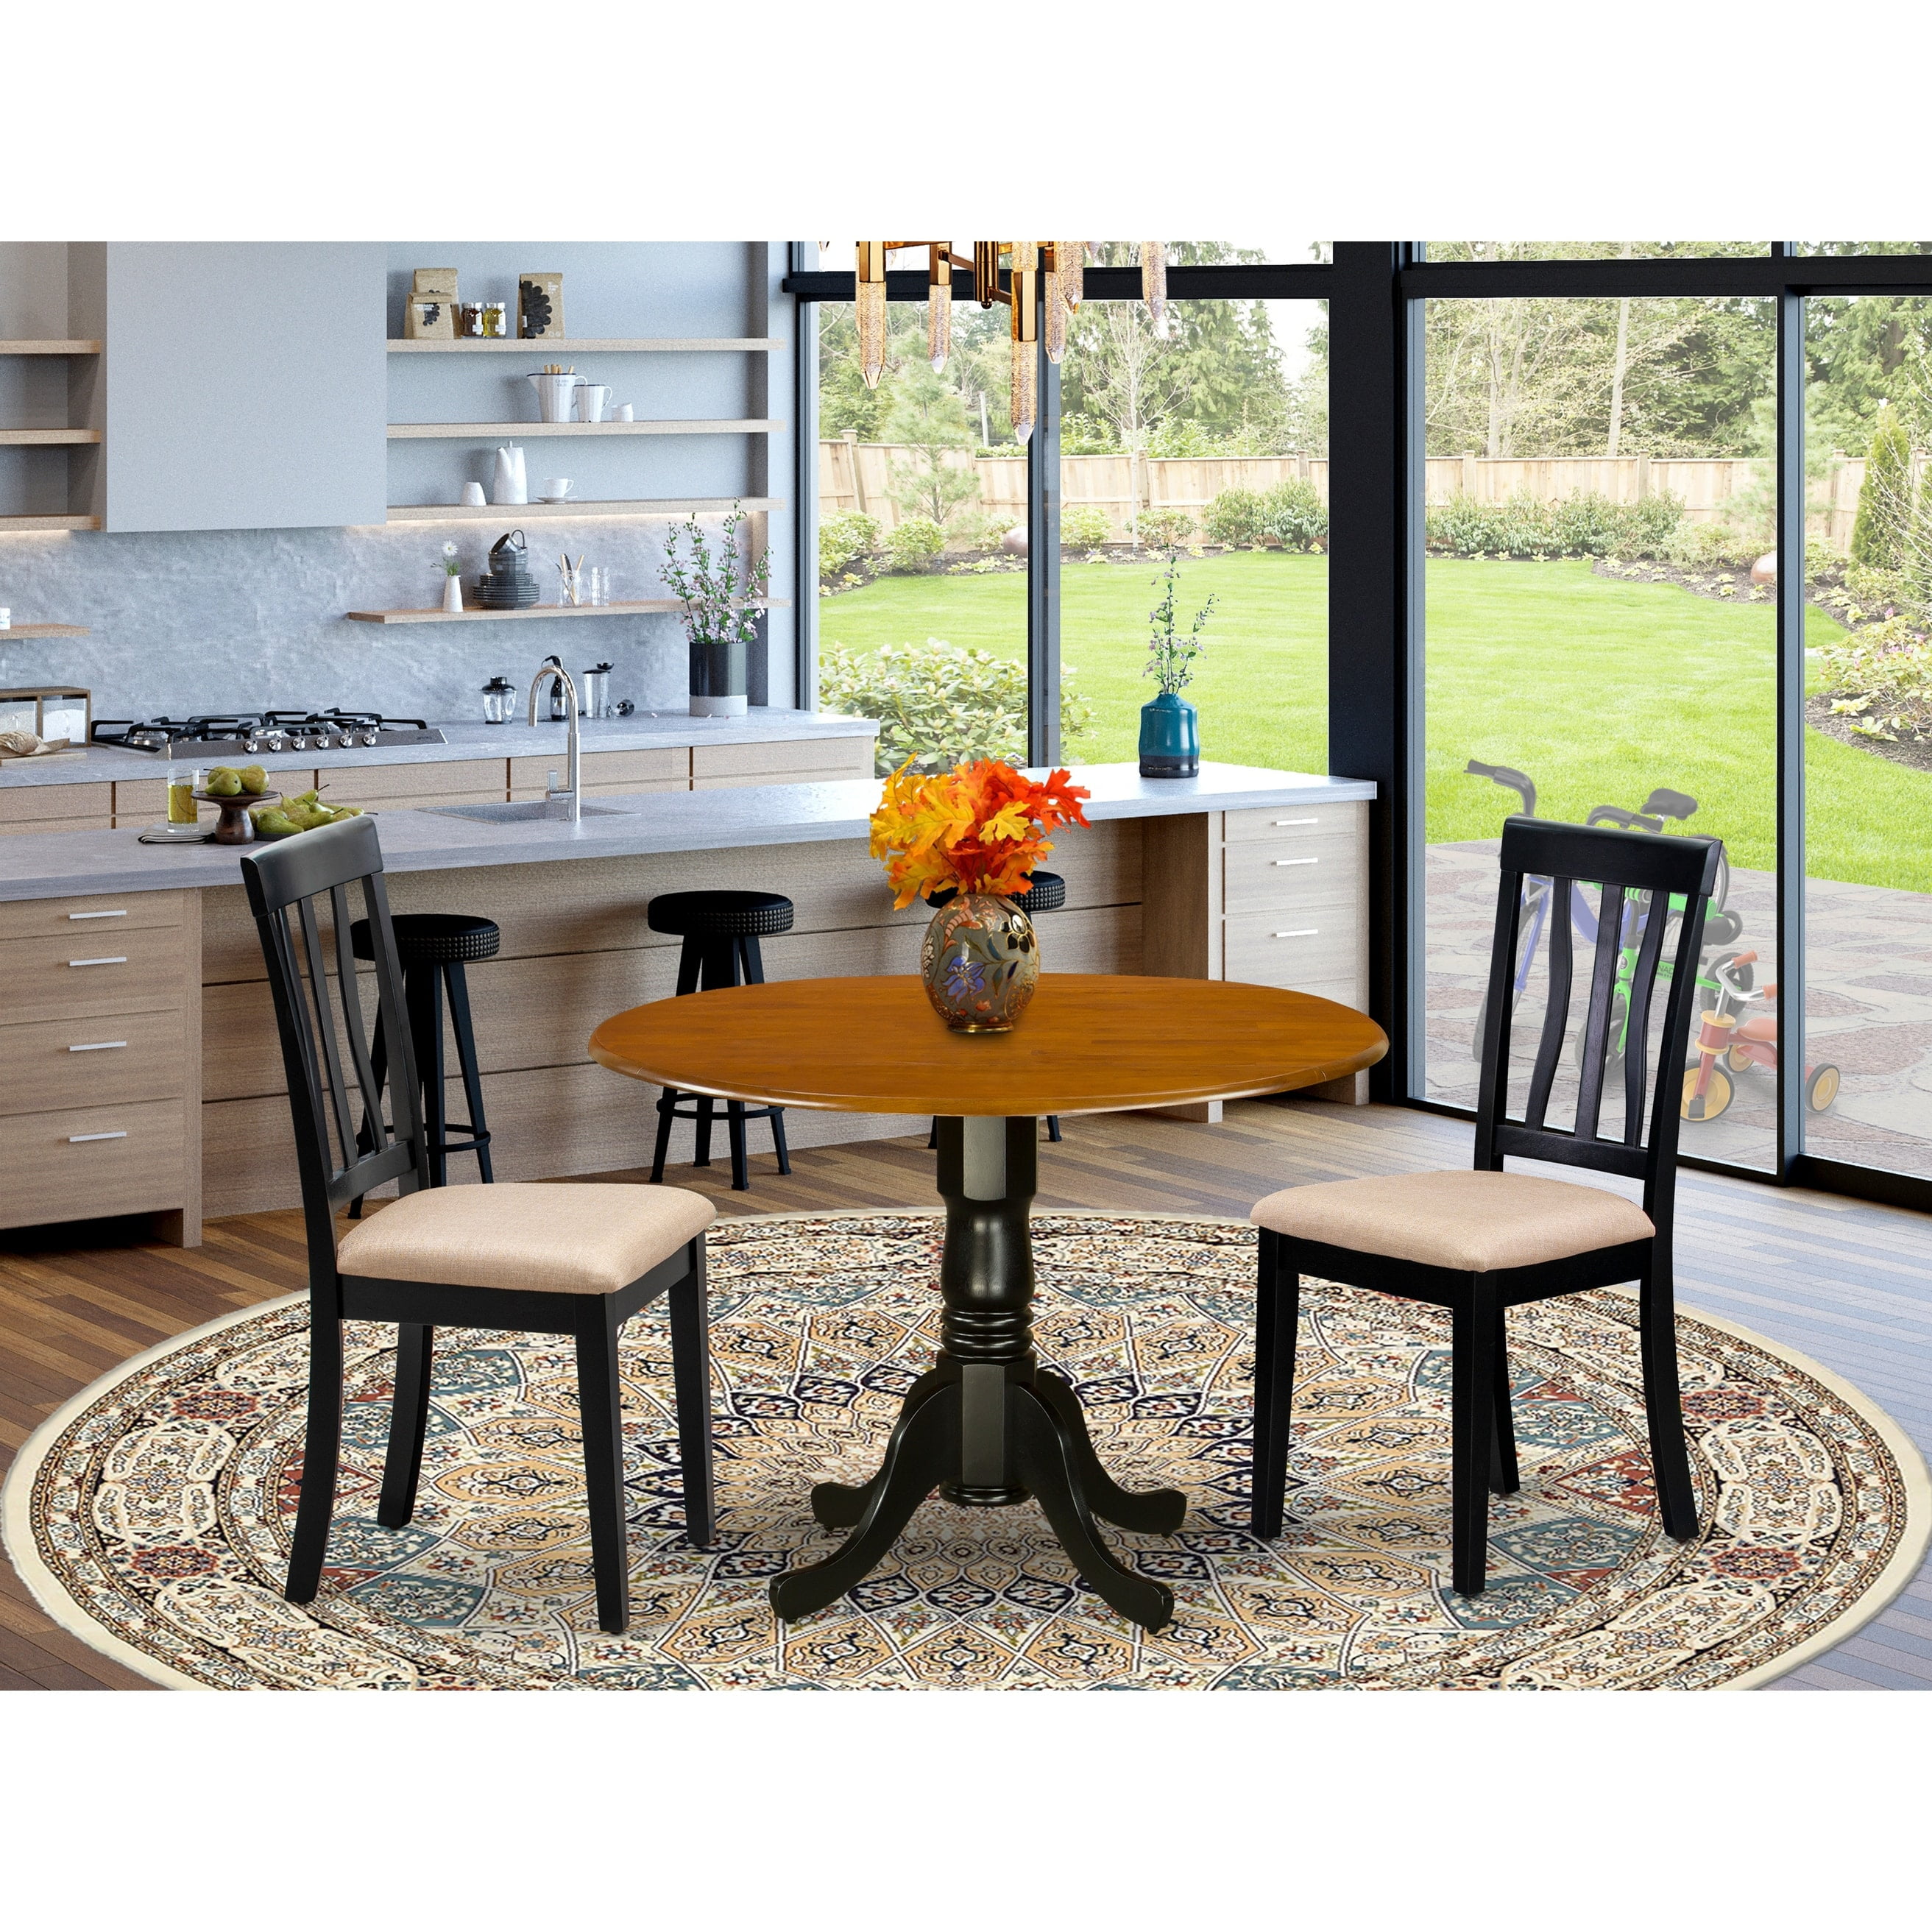 3PC SET ROUND DINETTE KITCHEN DINING TABLE with 2 WOOD SEAT CHAIRS IN BLACK 